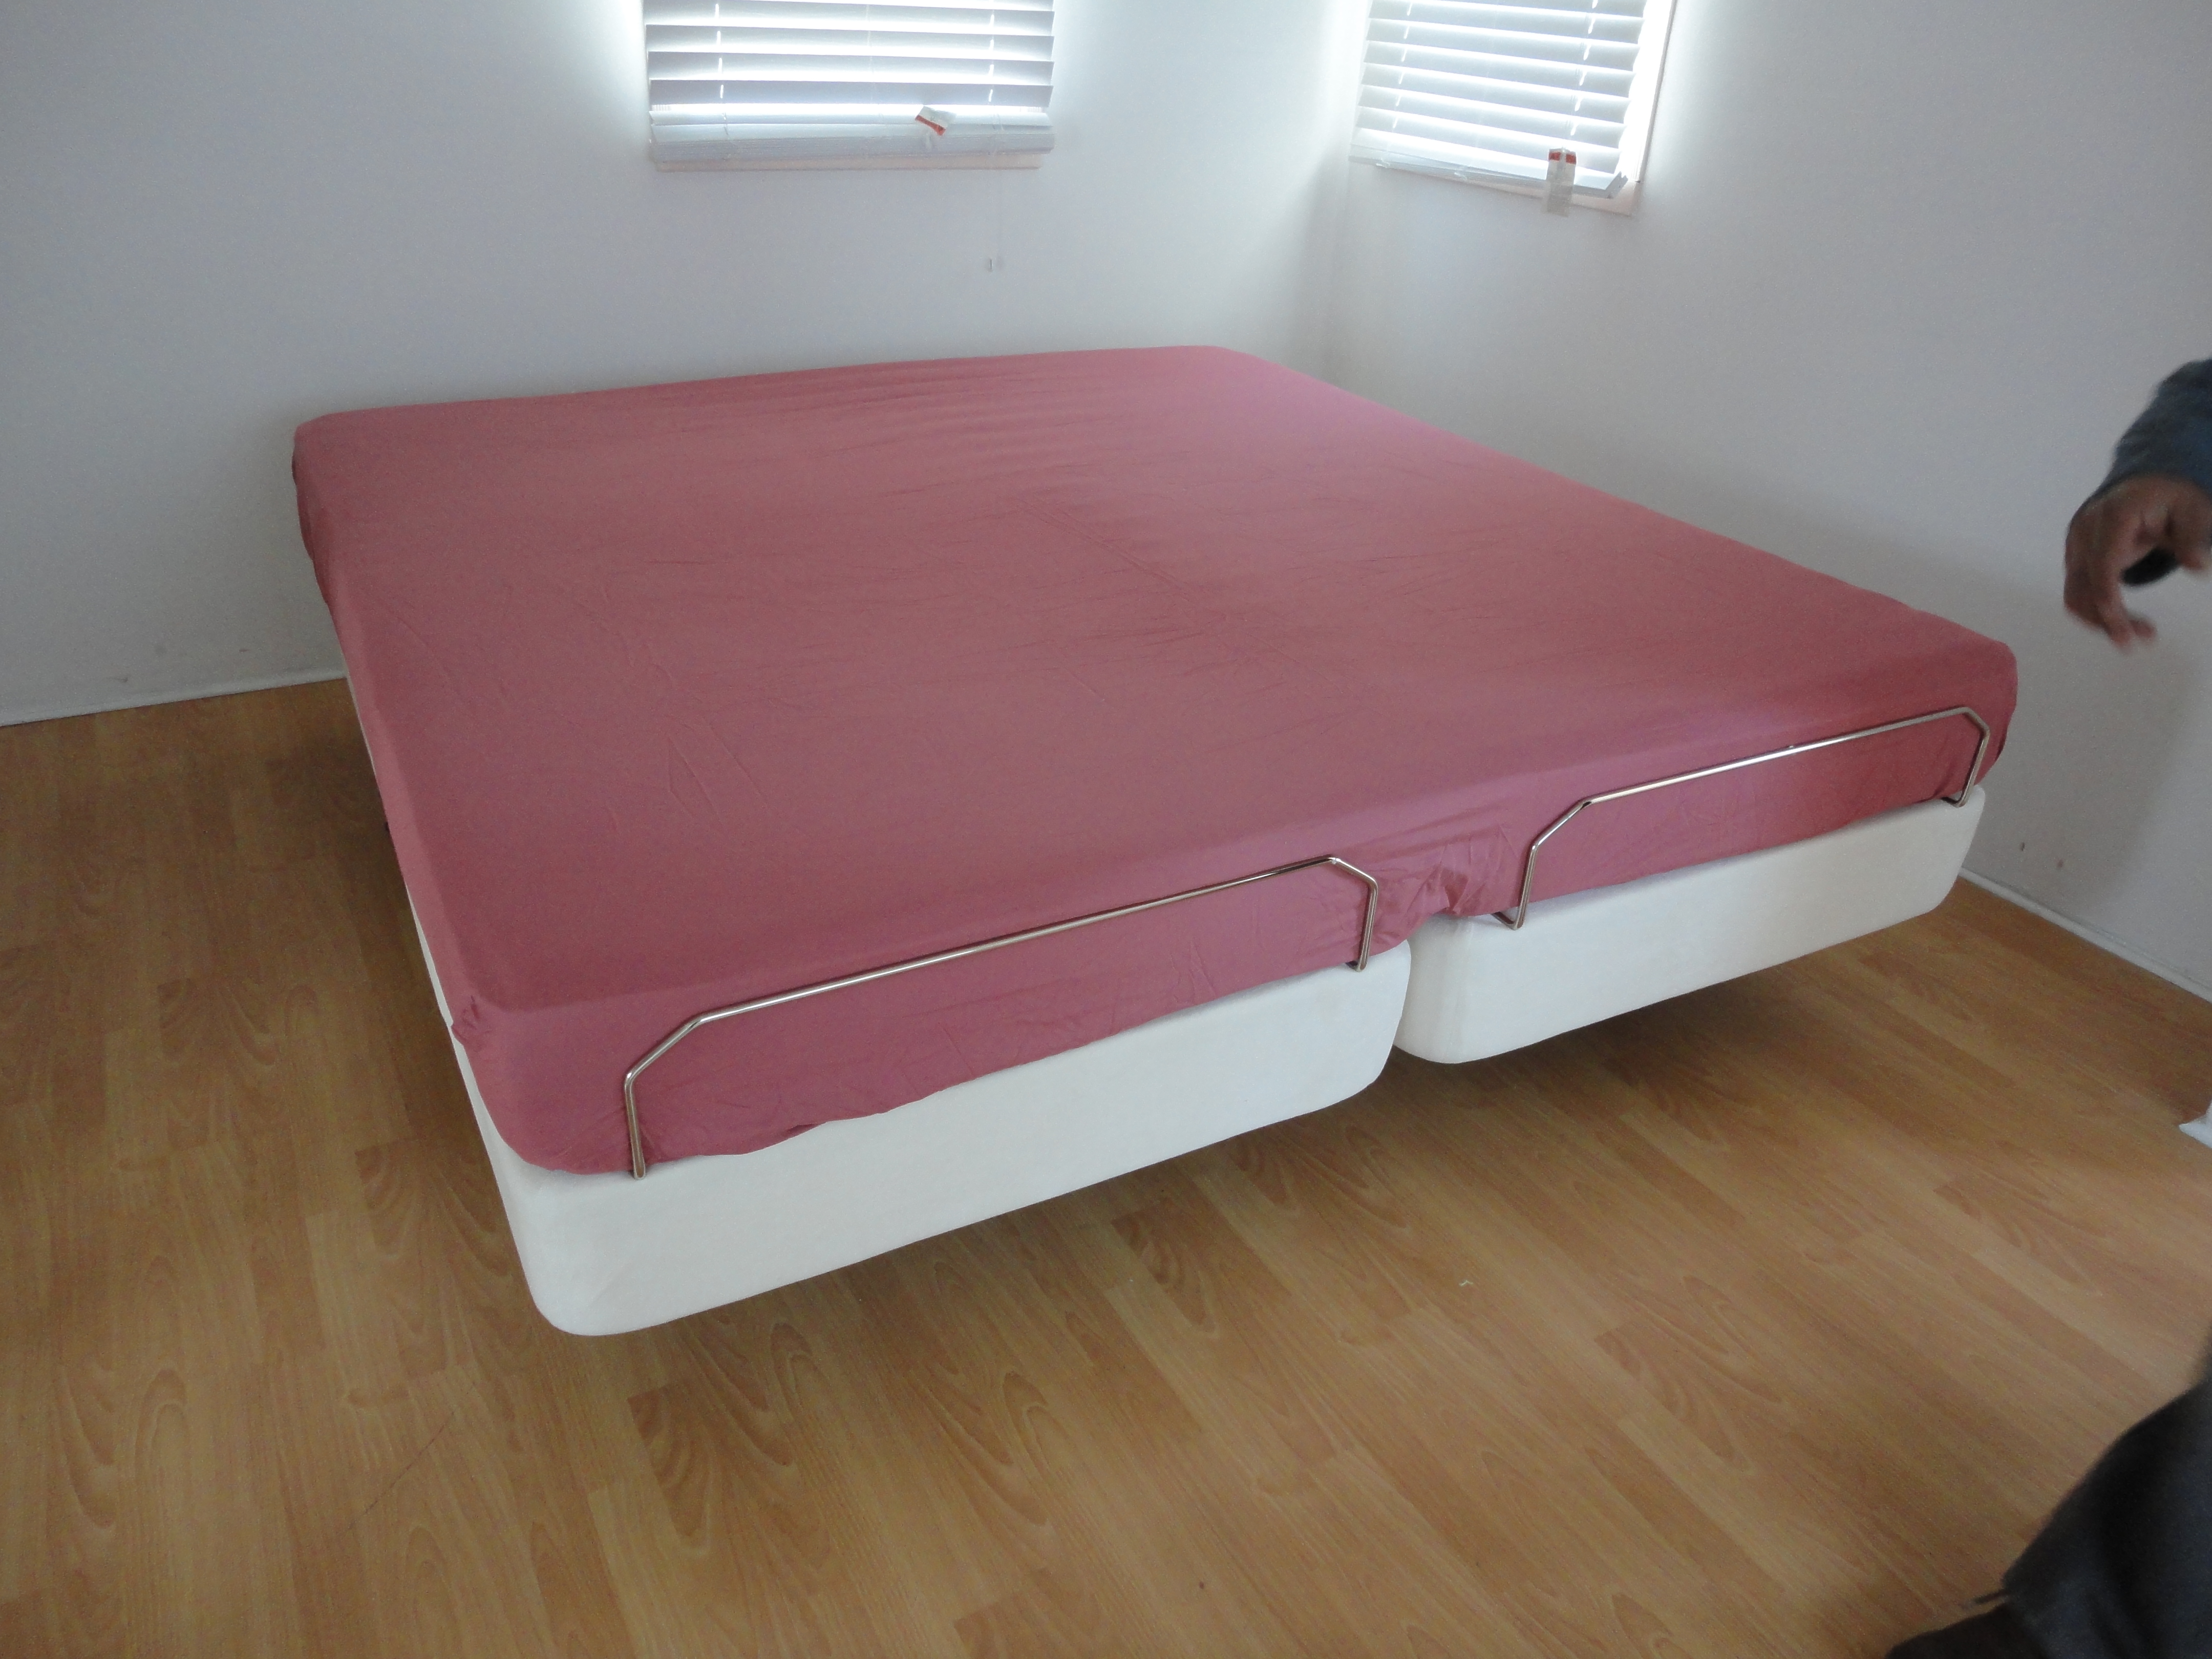 La Twin Single Adjustable Bed Size In, Do 2 Twin Beds Equal A Full